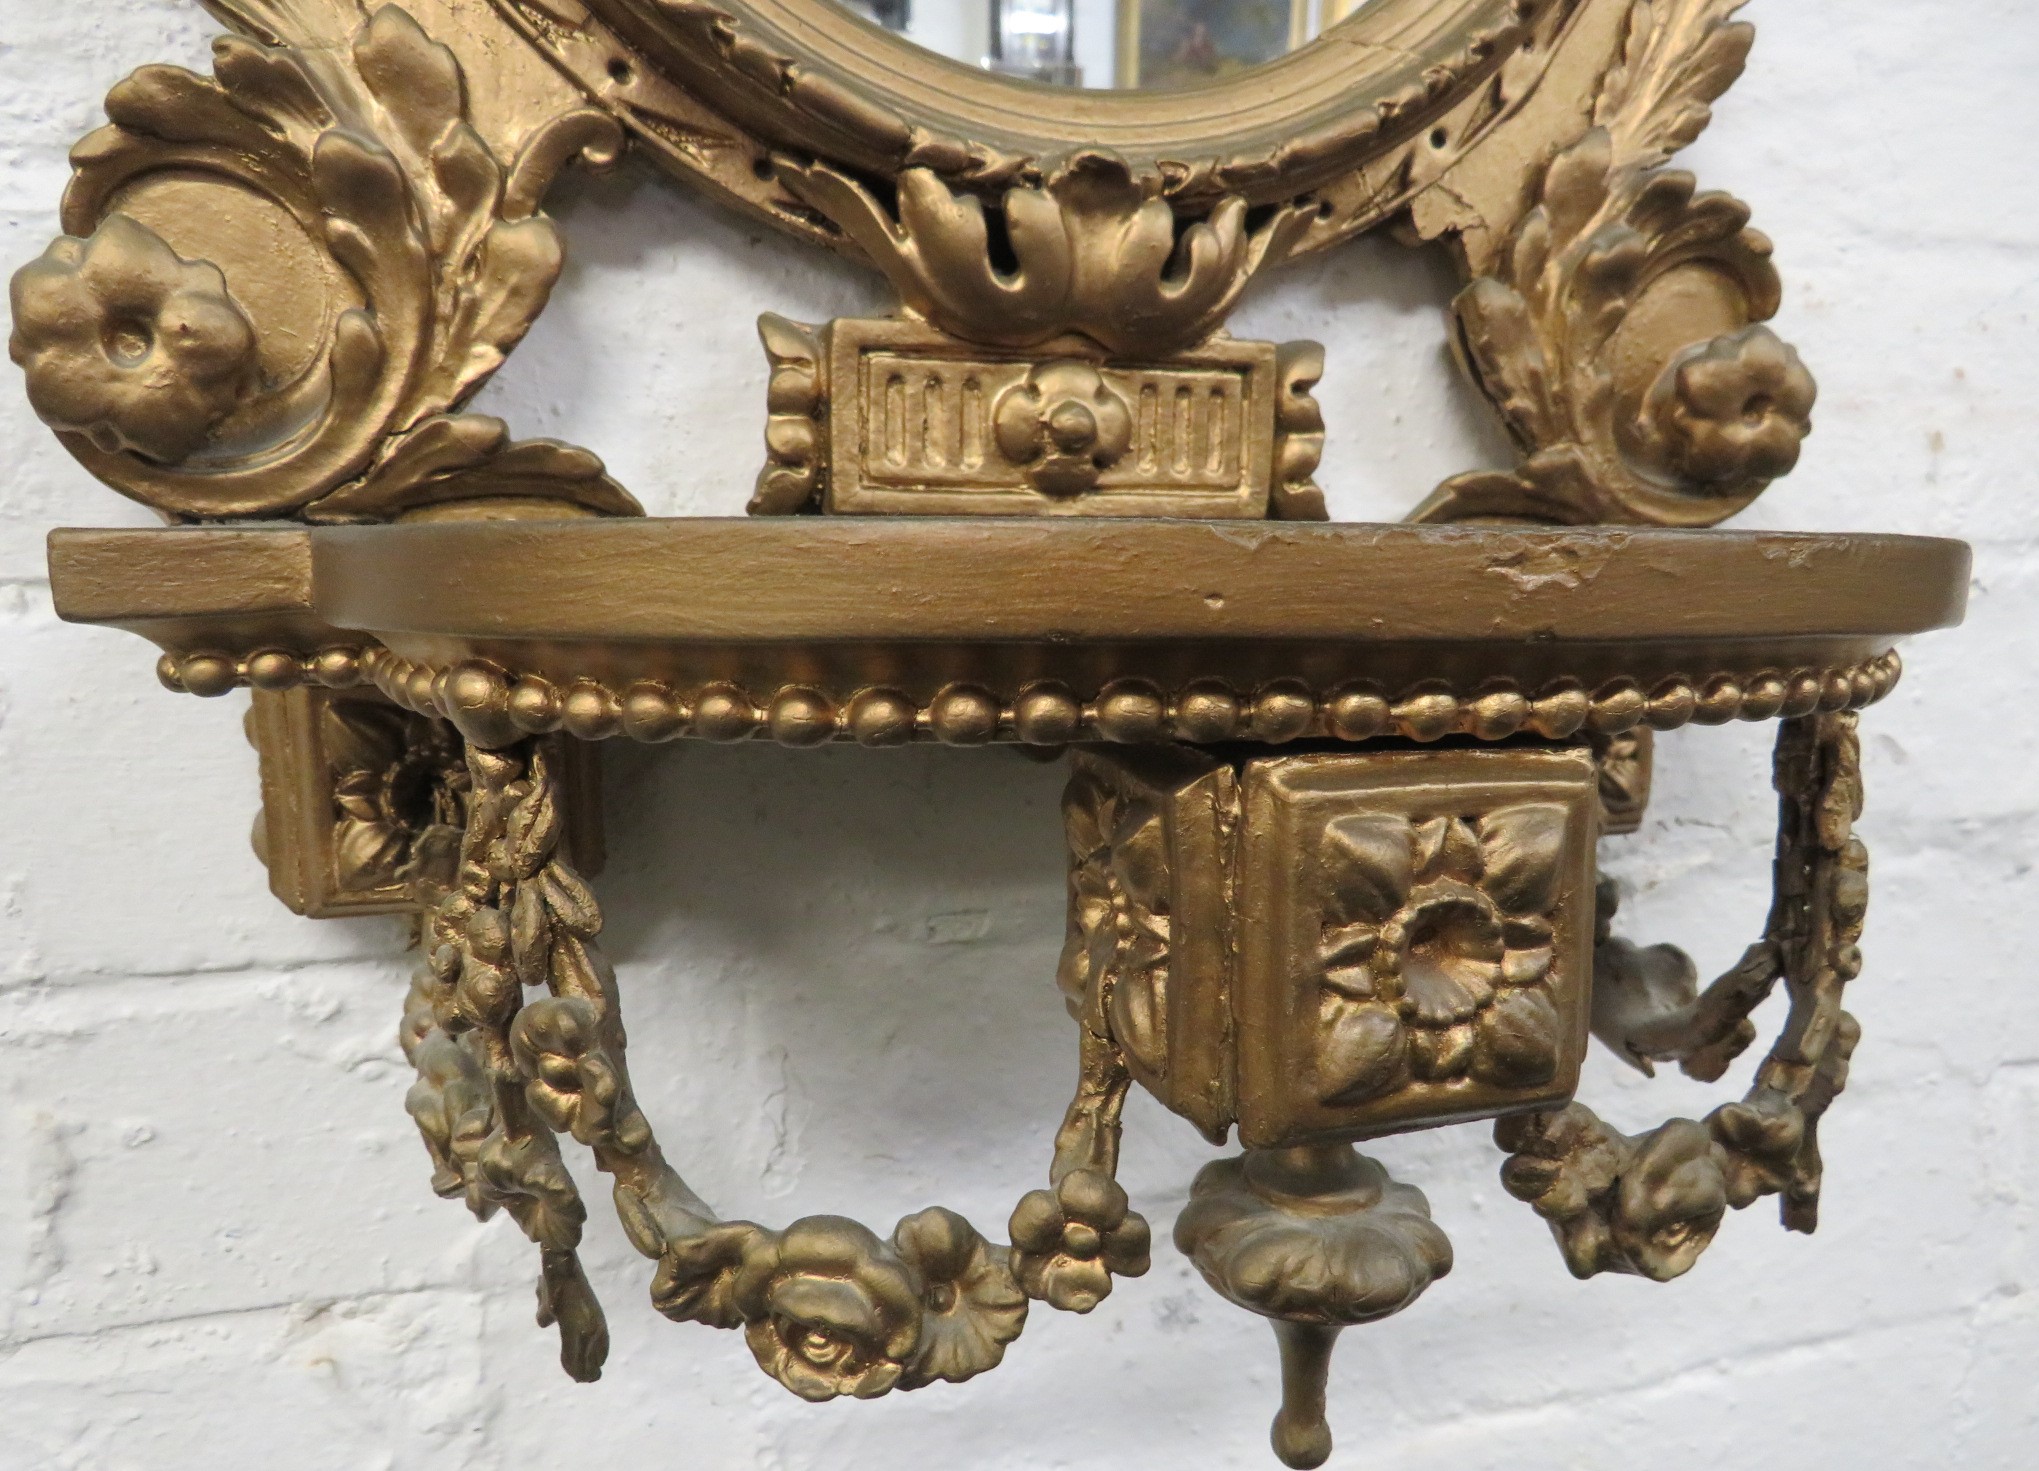 Gilt wood wall bracket with oval mirror and a shelf above and below, carved acanthus and swags and a - Image 3 of 3